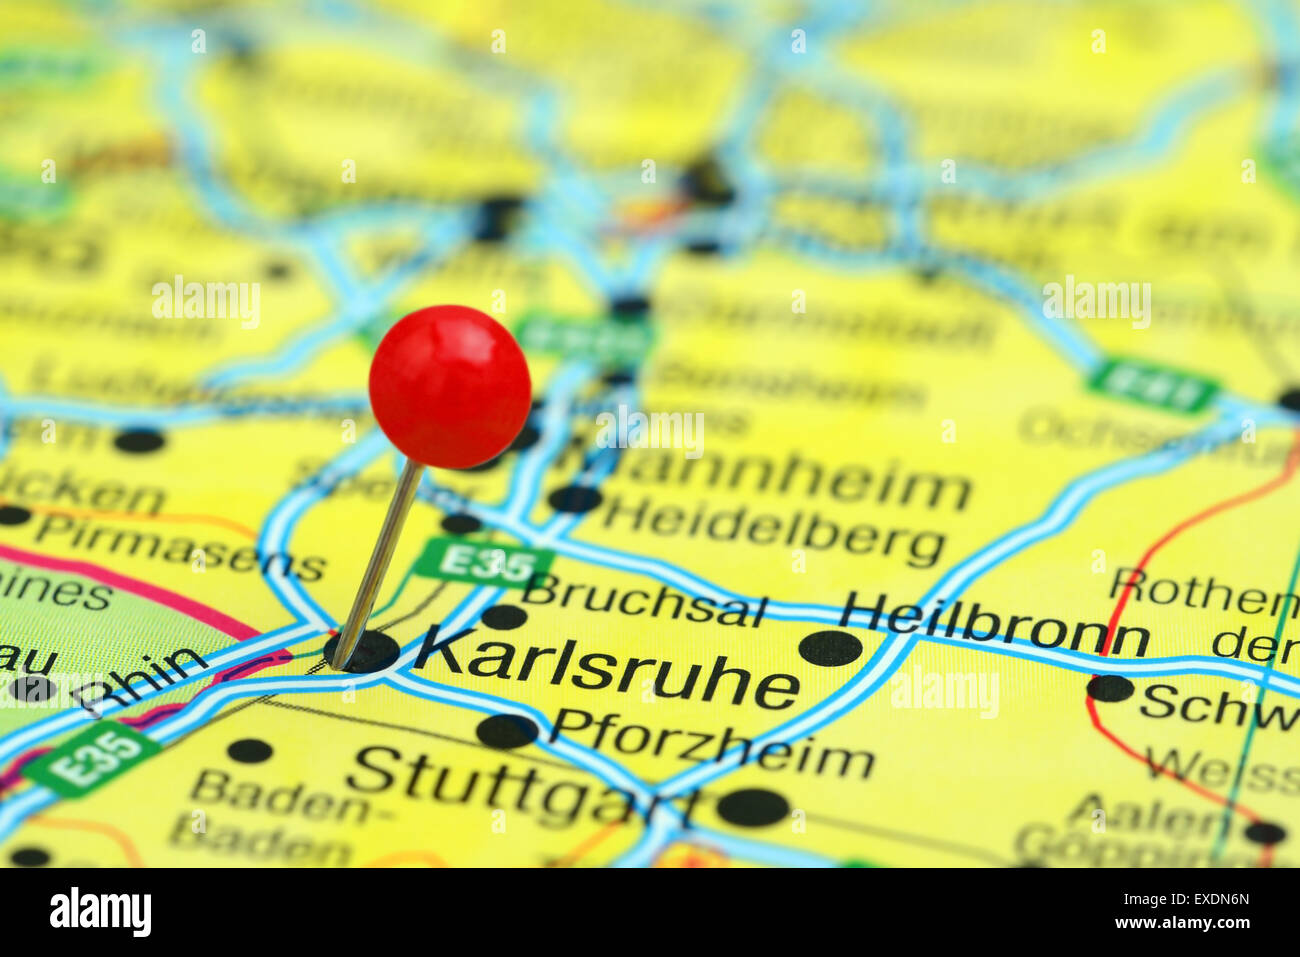 Karlsruhe pinned on a map of europe Stock Photo